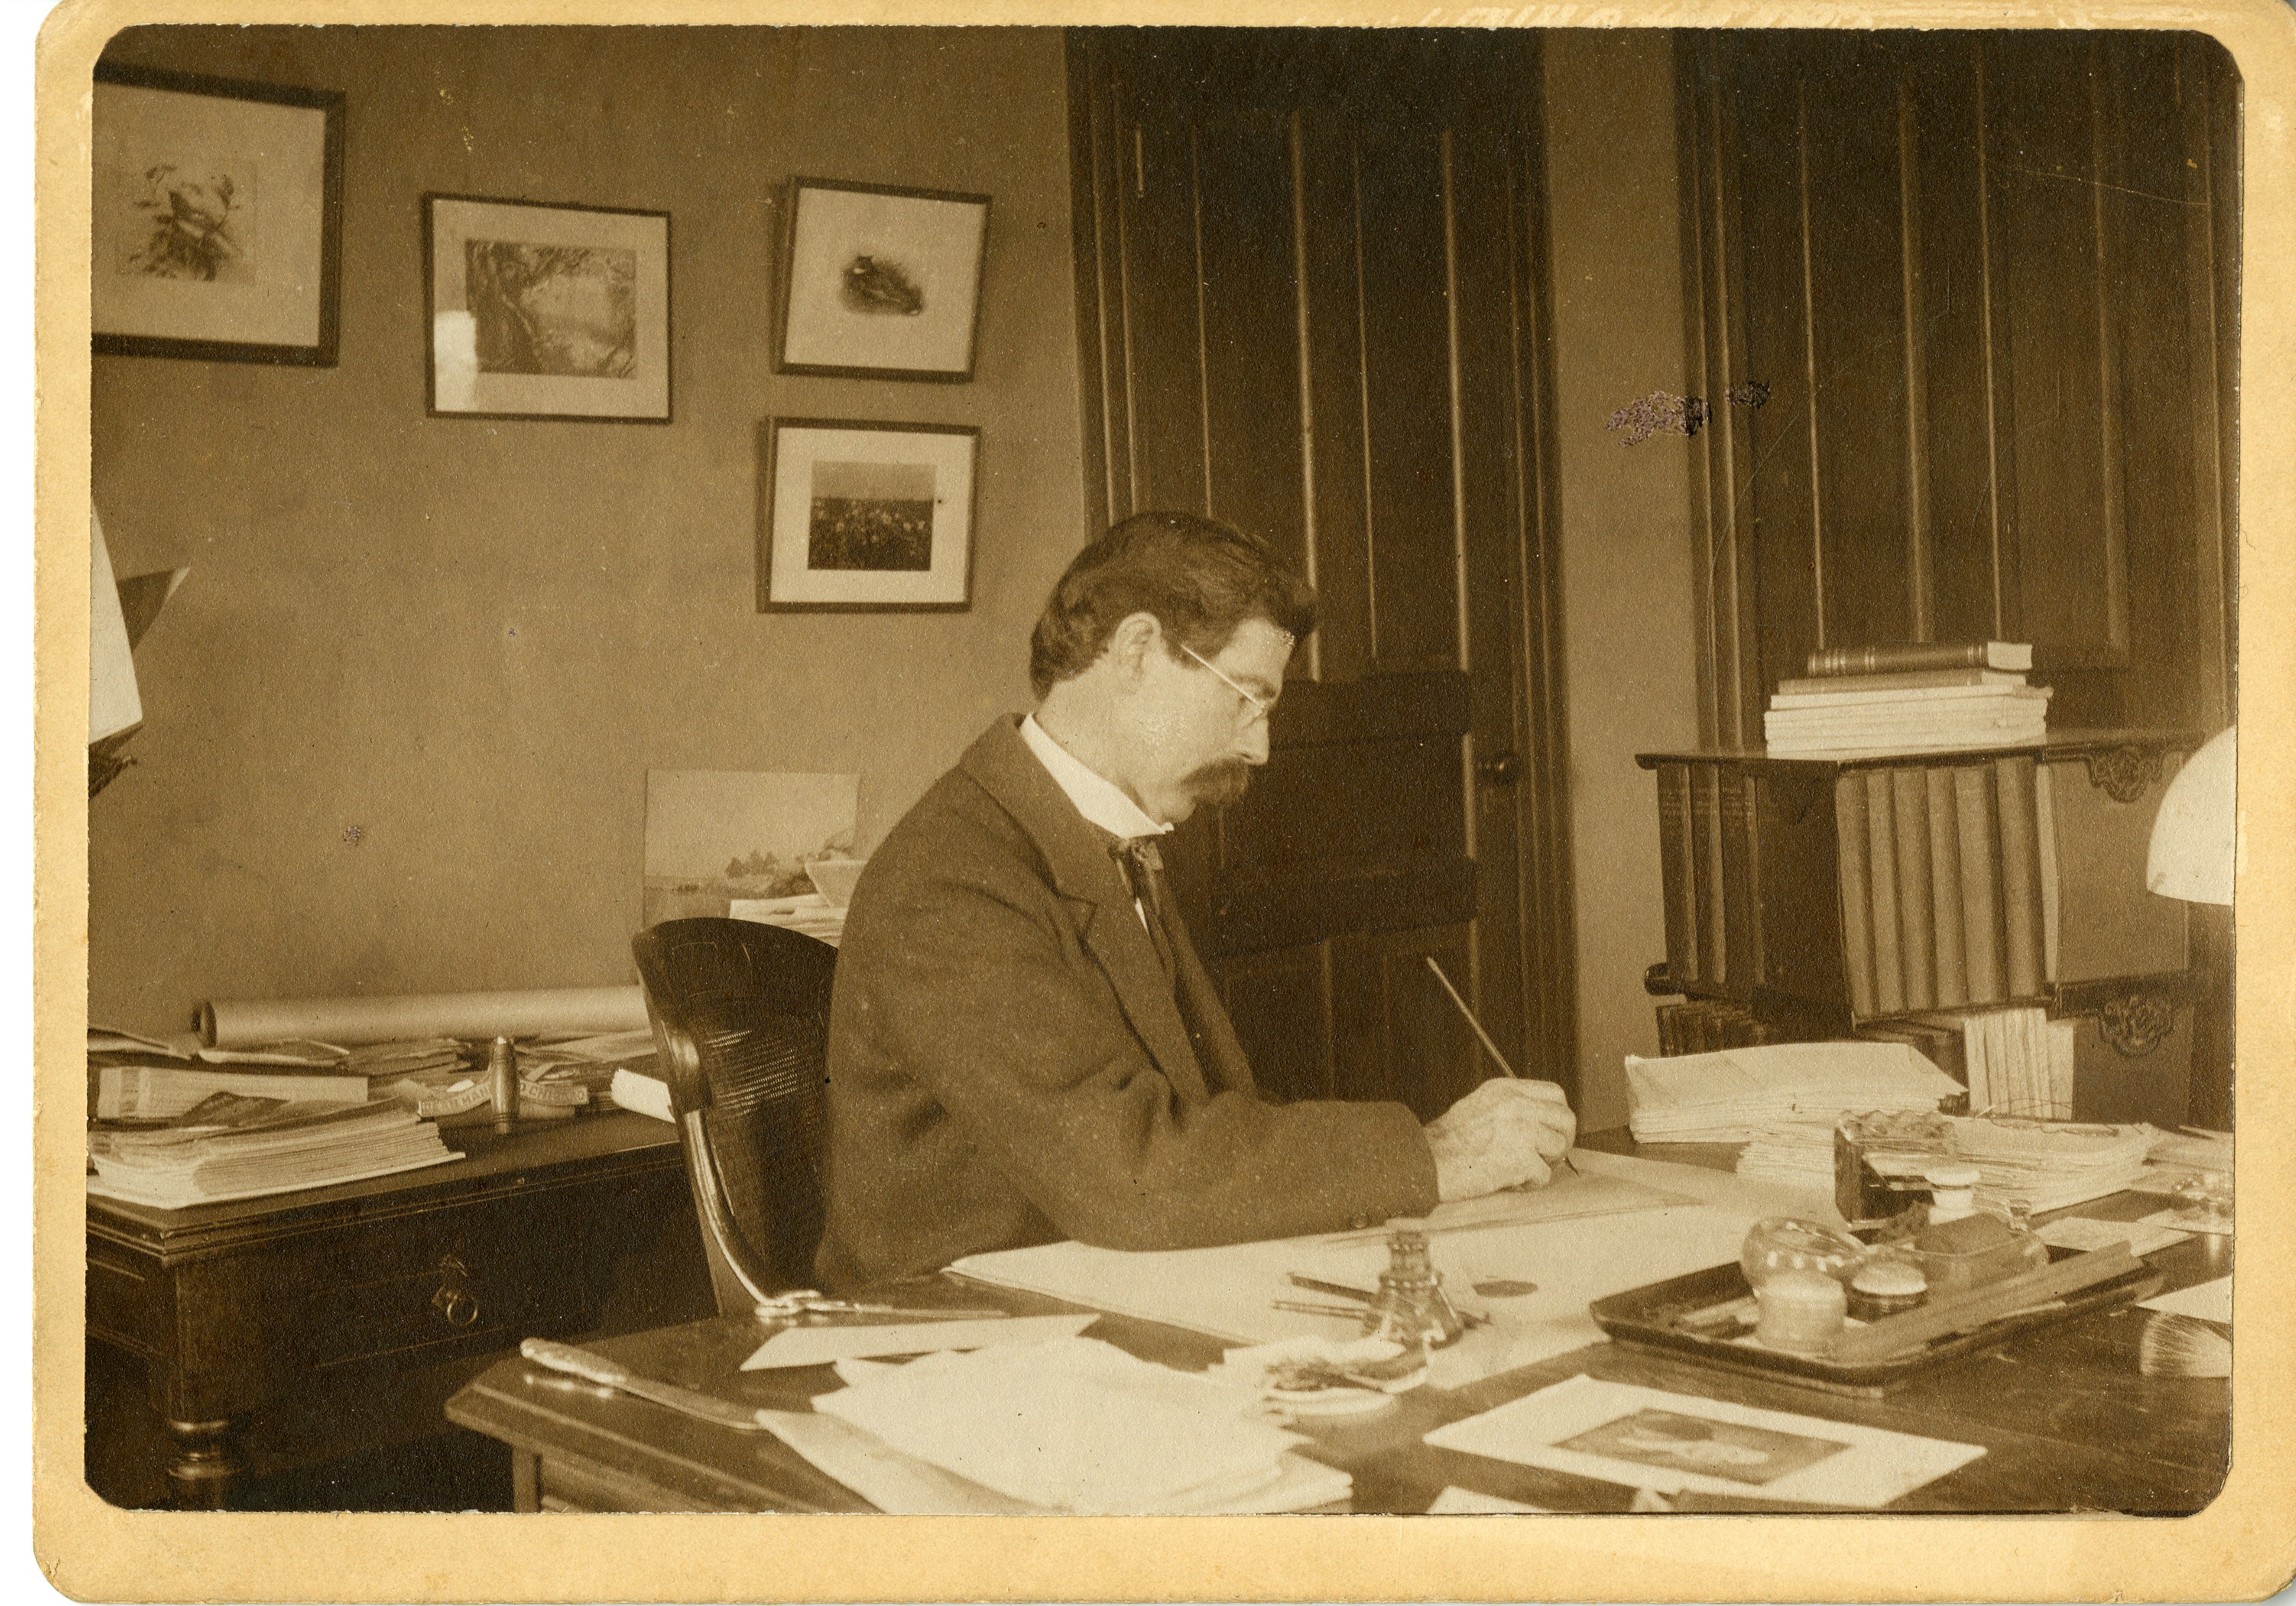 Robert Ridgway sits writing at his desk in his office located in the United States National Museum, 